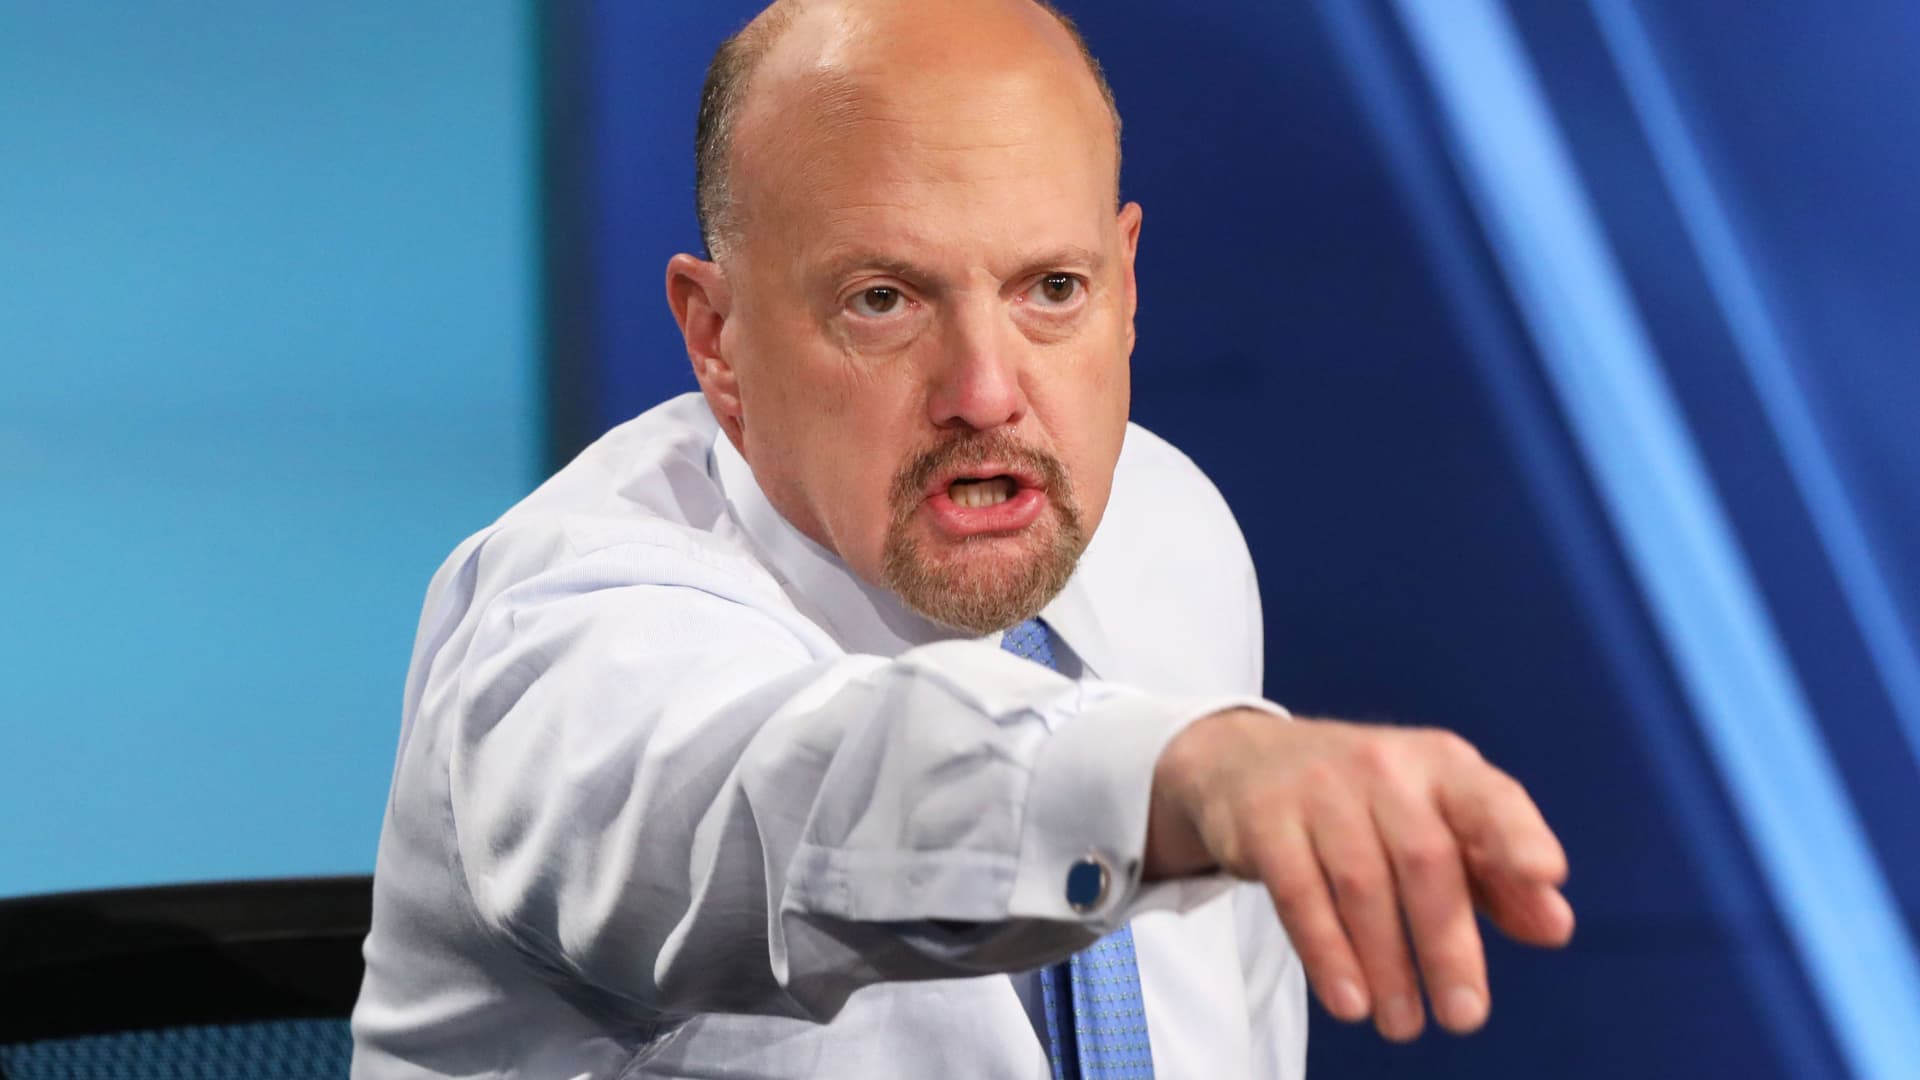 Jim Cramer: Make this smart investment in times of inflation and ‘economic chaos’